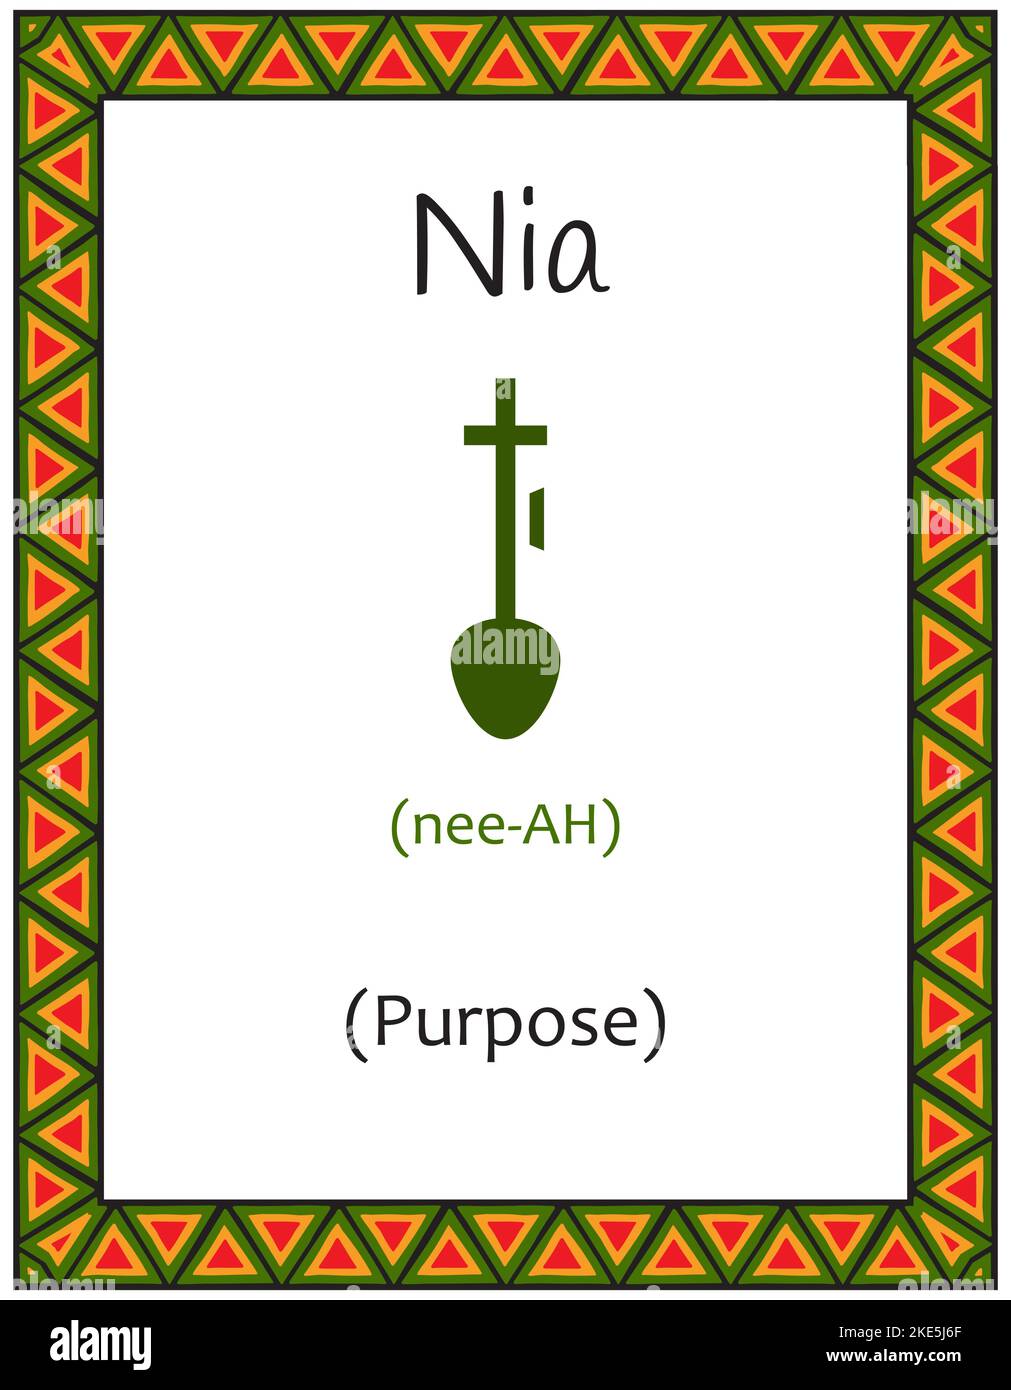 A card with one of the Kwanzaa principles. Symbol Nia means Purpose in Swahili. Poster with an ethnic African pattern in traditional colors. Vector il Stock Vector